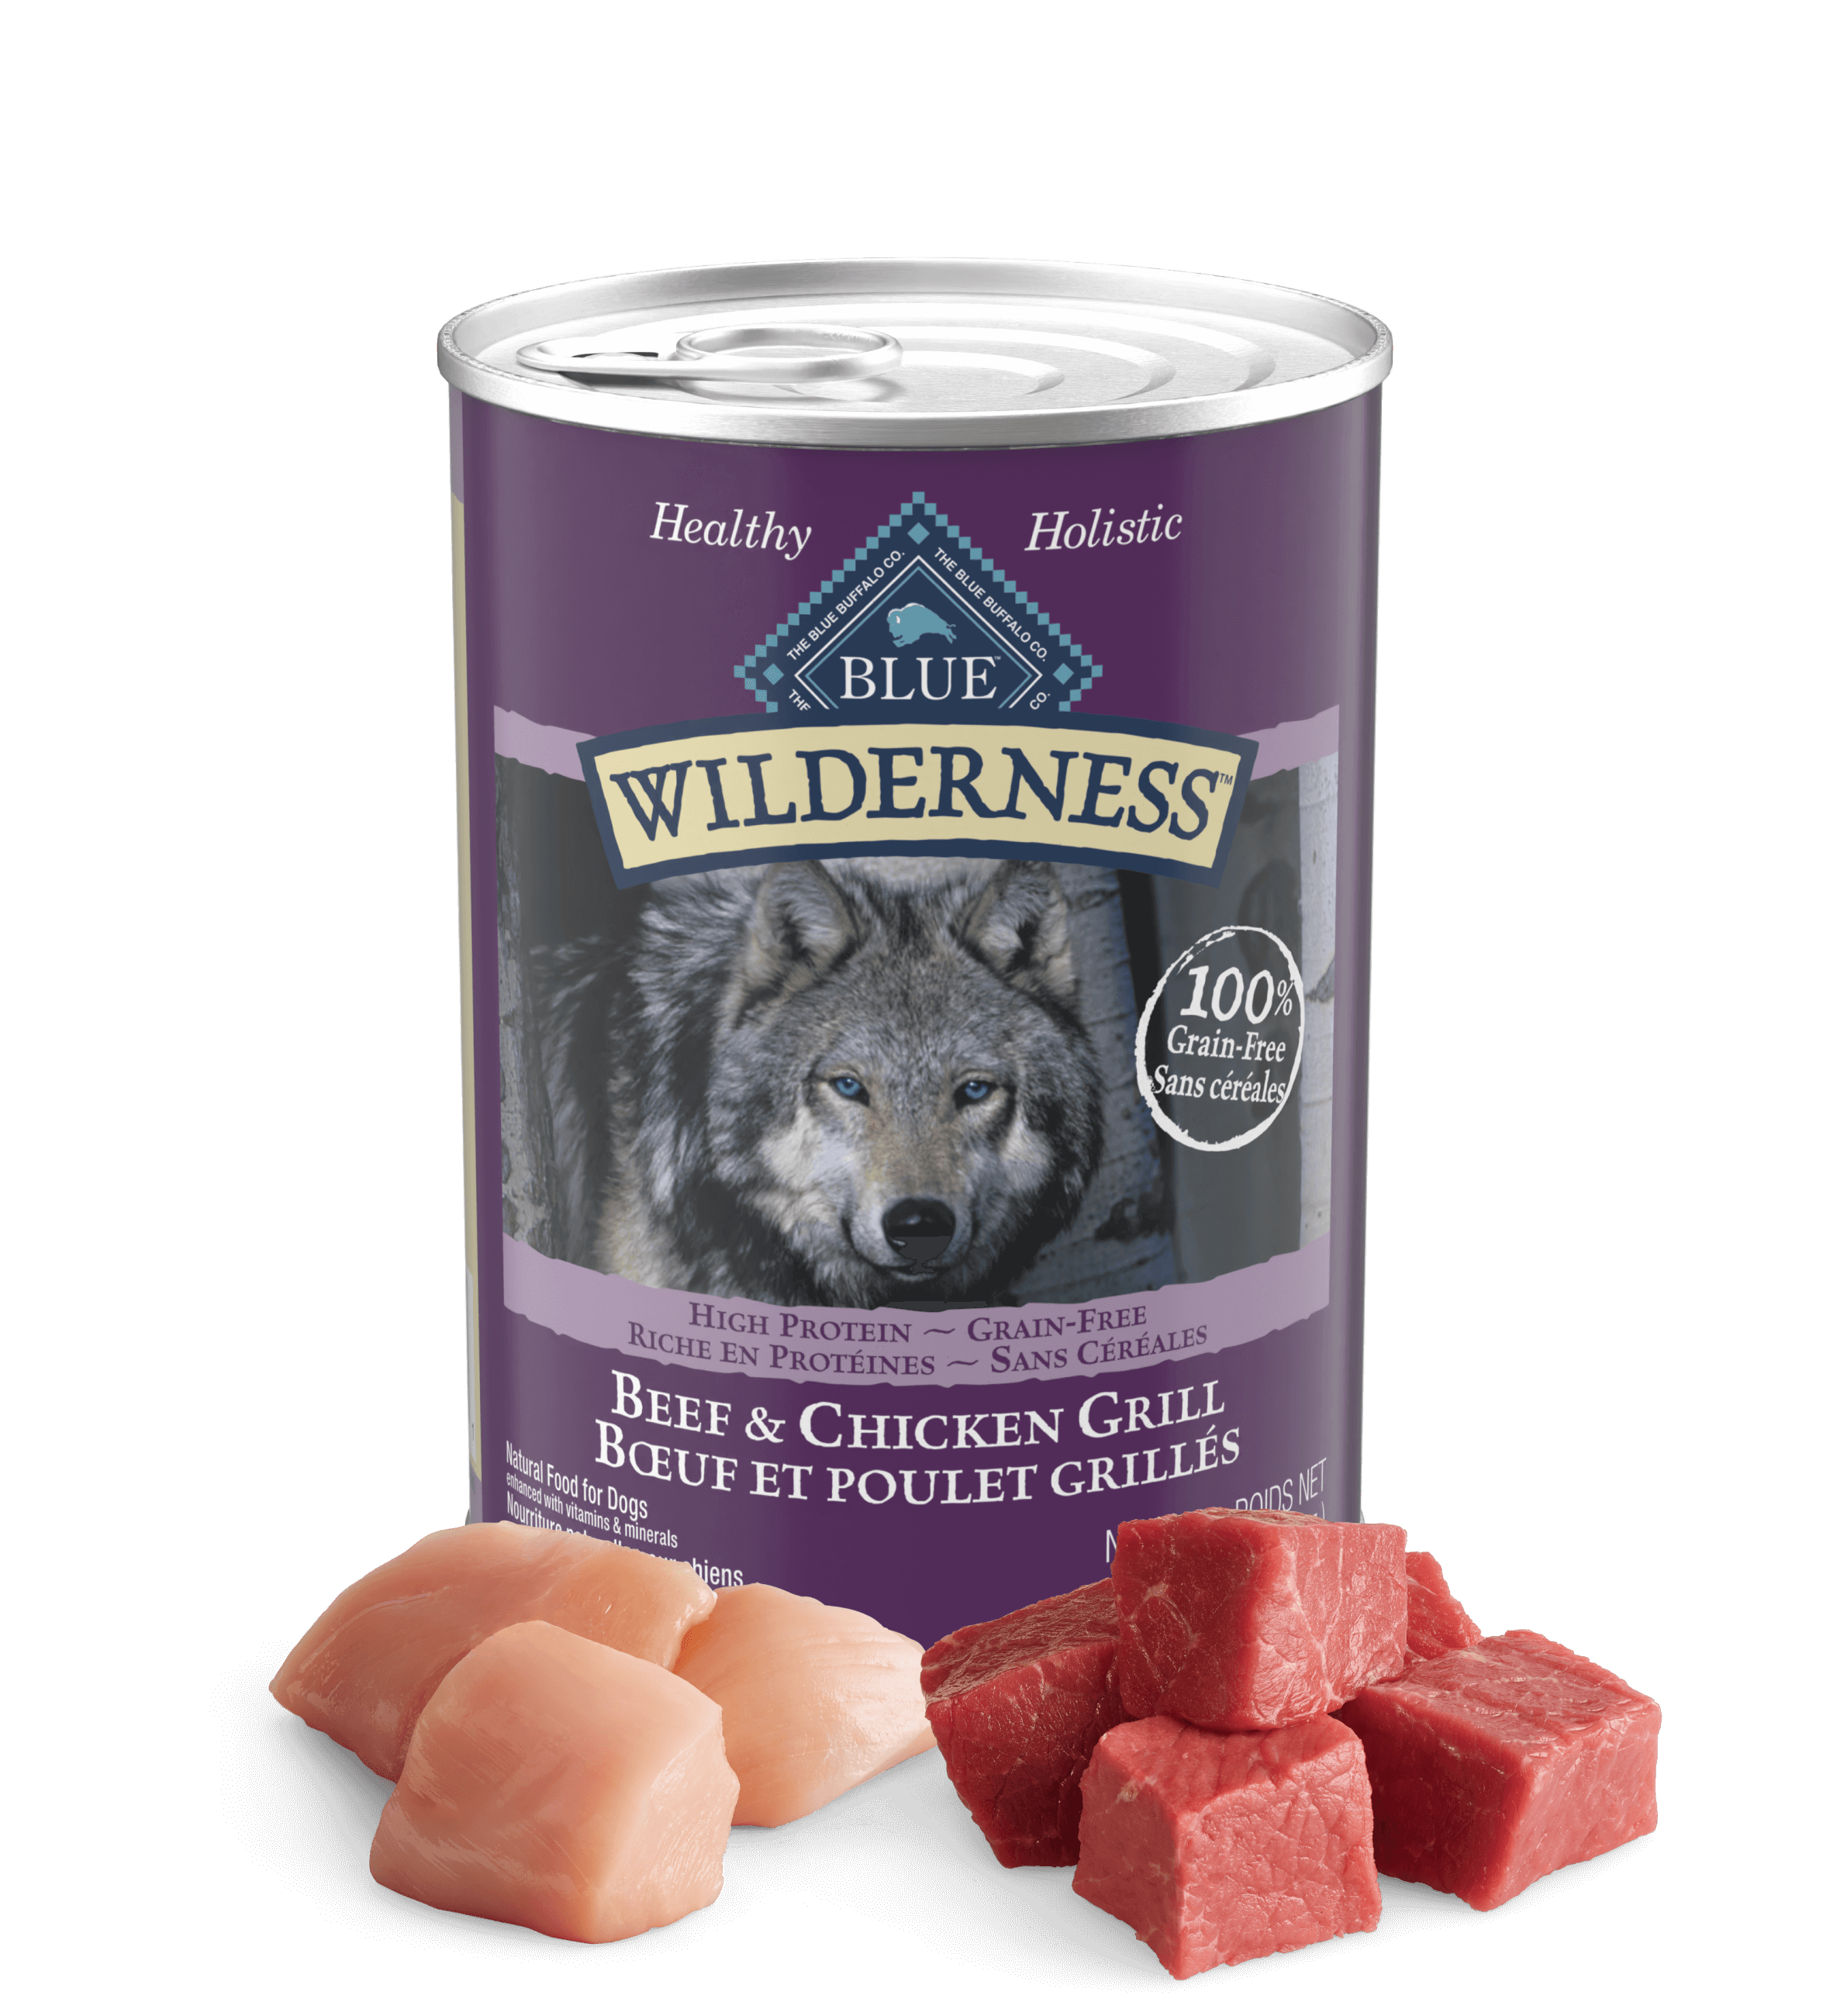 A can of Wilderness Adult Dog Beef & Chicken Grill dog wet food